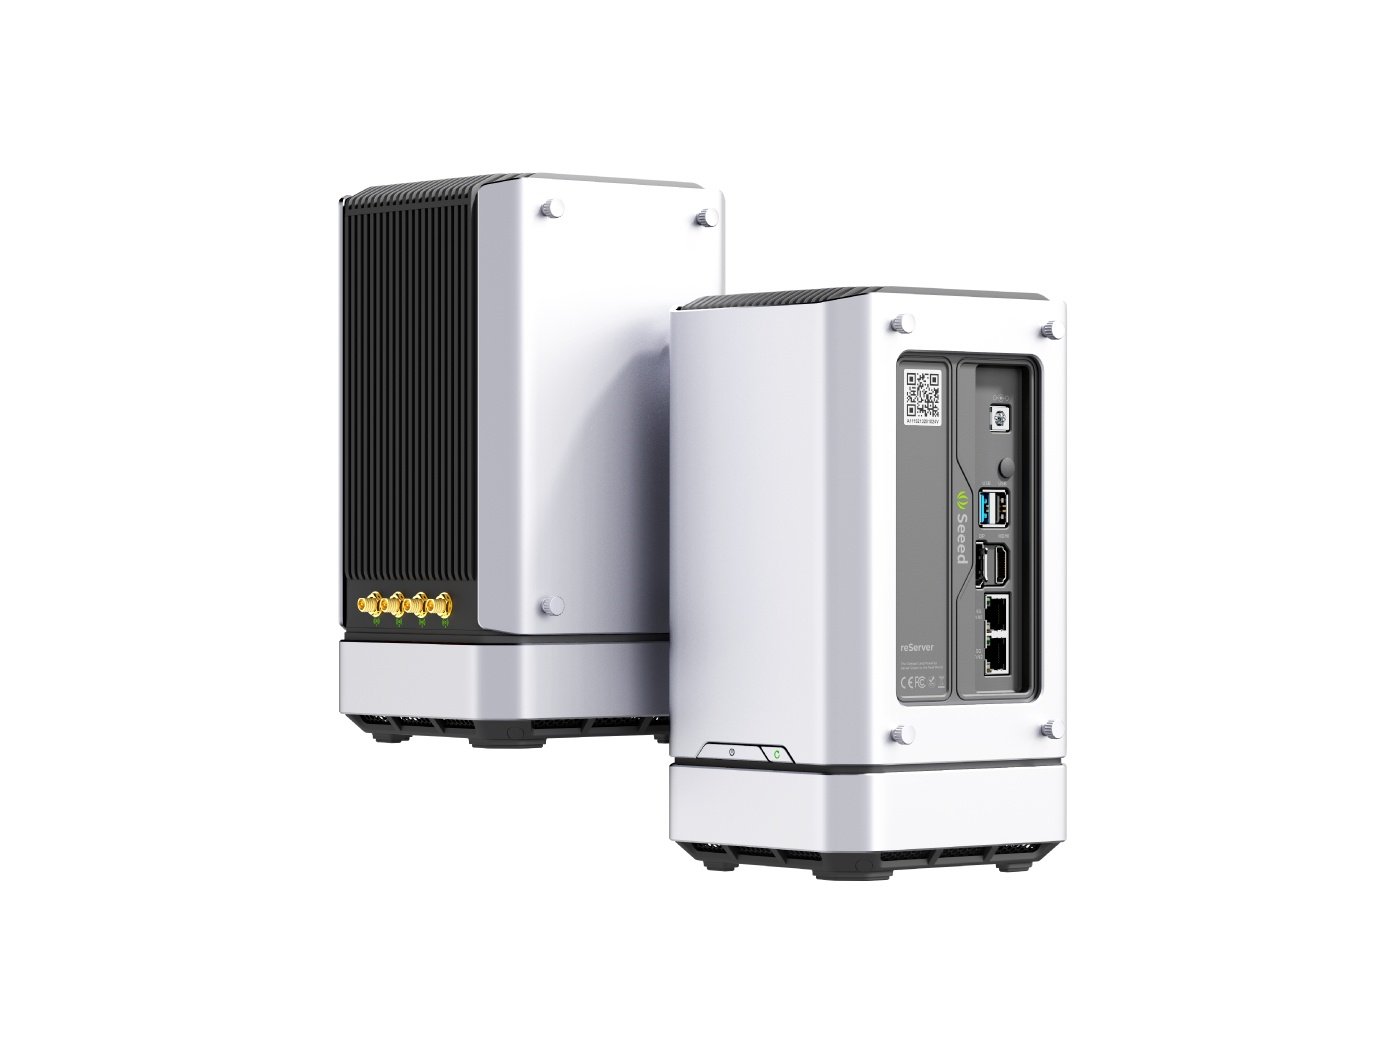 reServer - Compact Edge Server powered by 11th Gen Intel® Core™